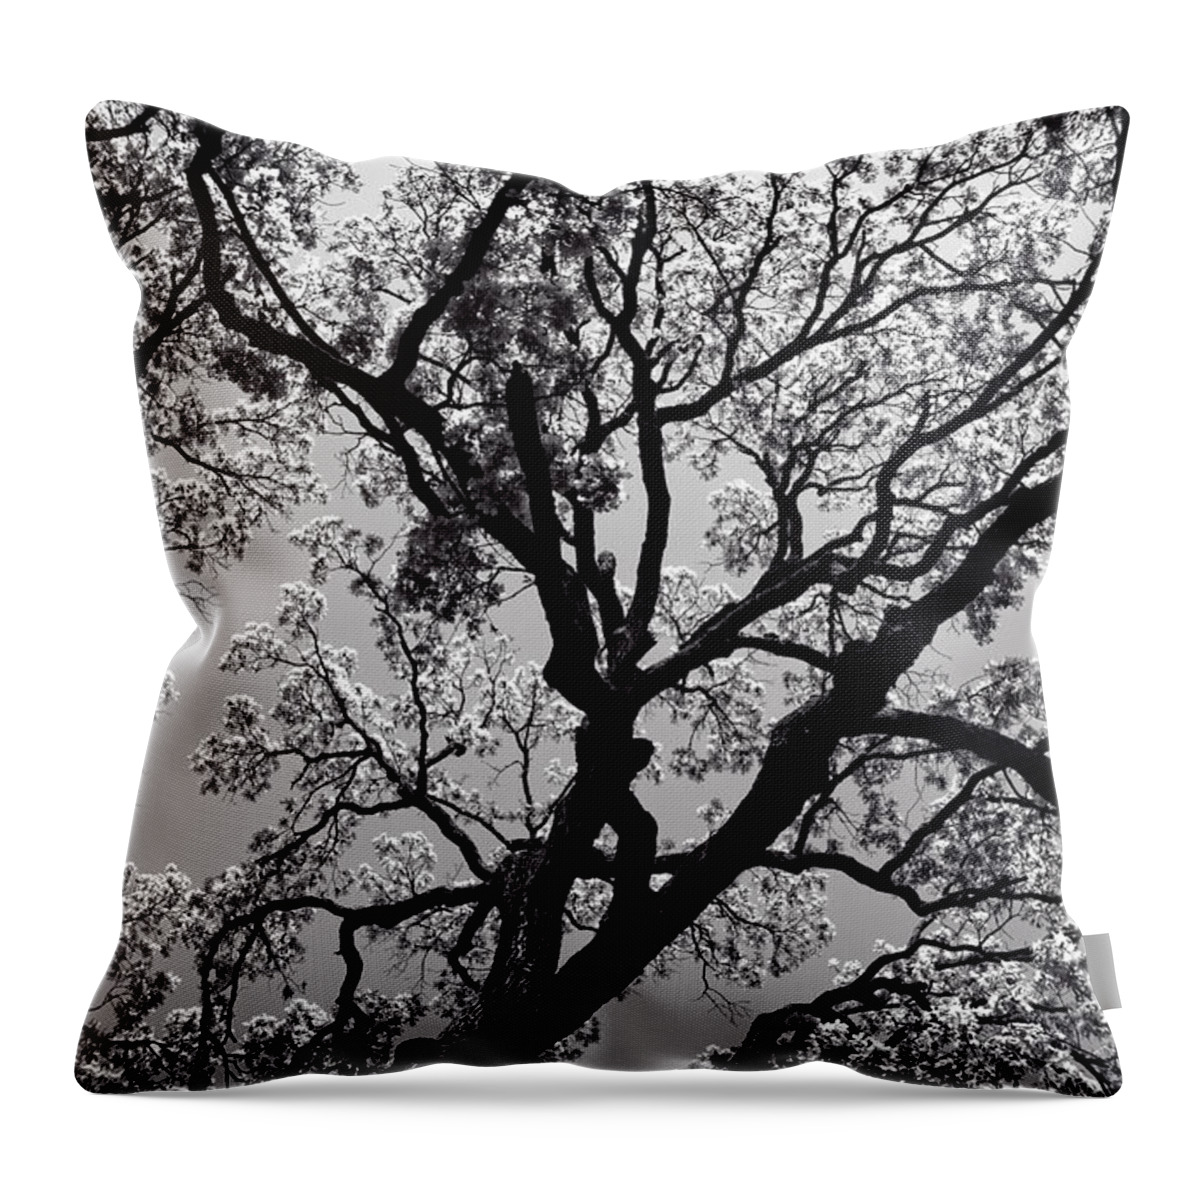 Art Throw Pillow featuring the photograph Family Tree by Charles Dobbs